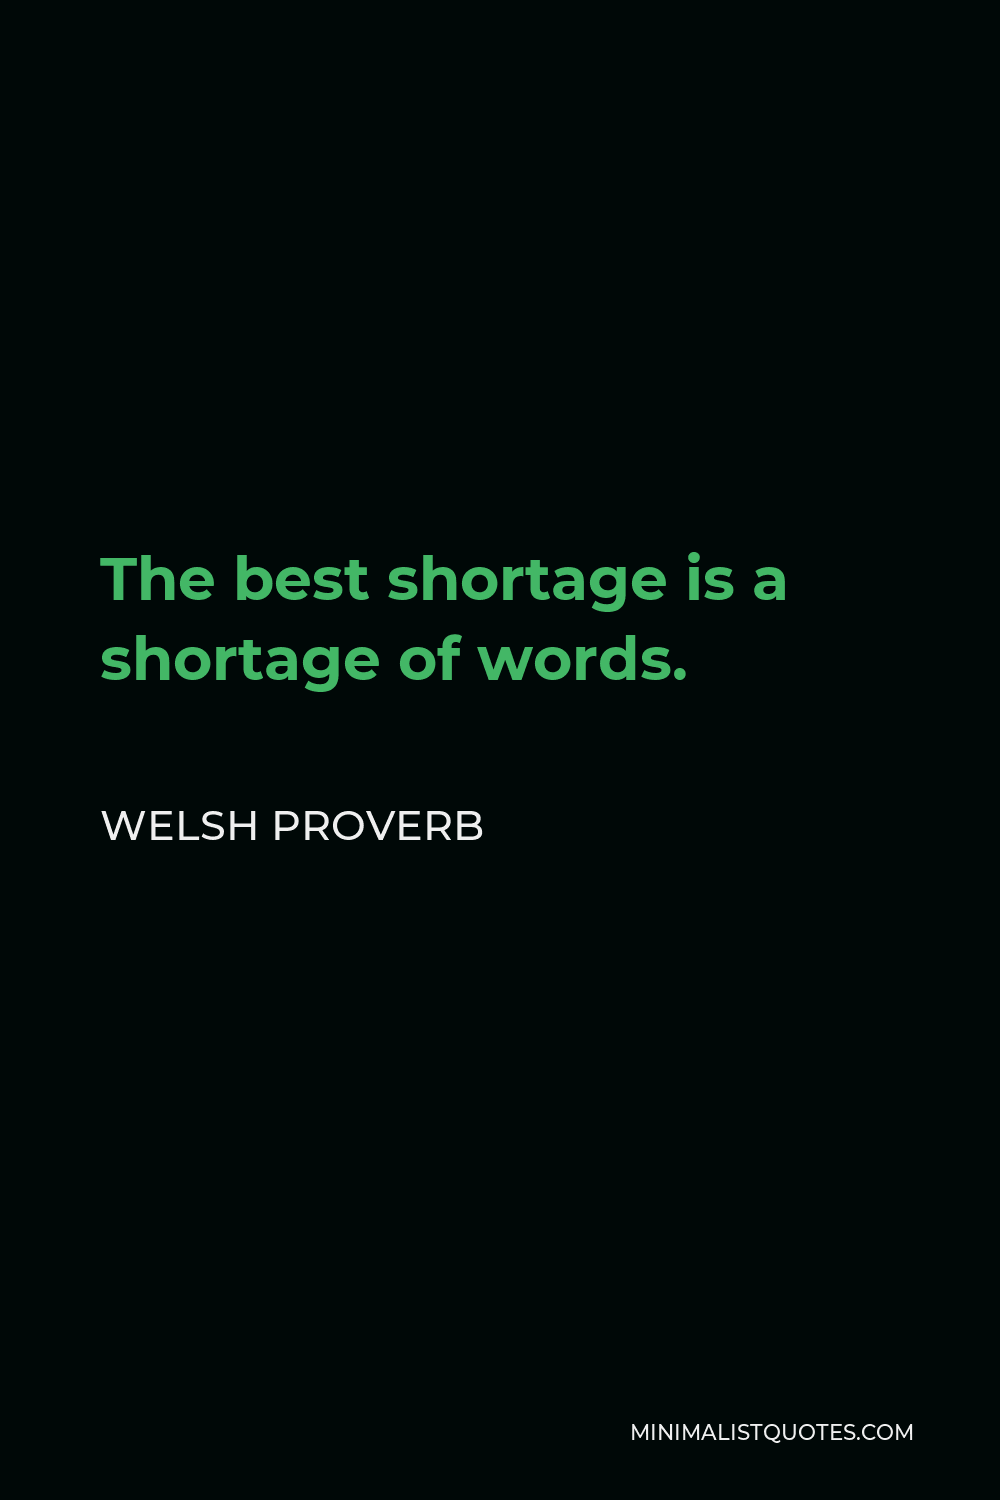 Welsh Proverb Quote - The best shortage is a shortage of words.